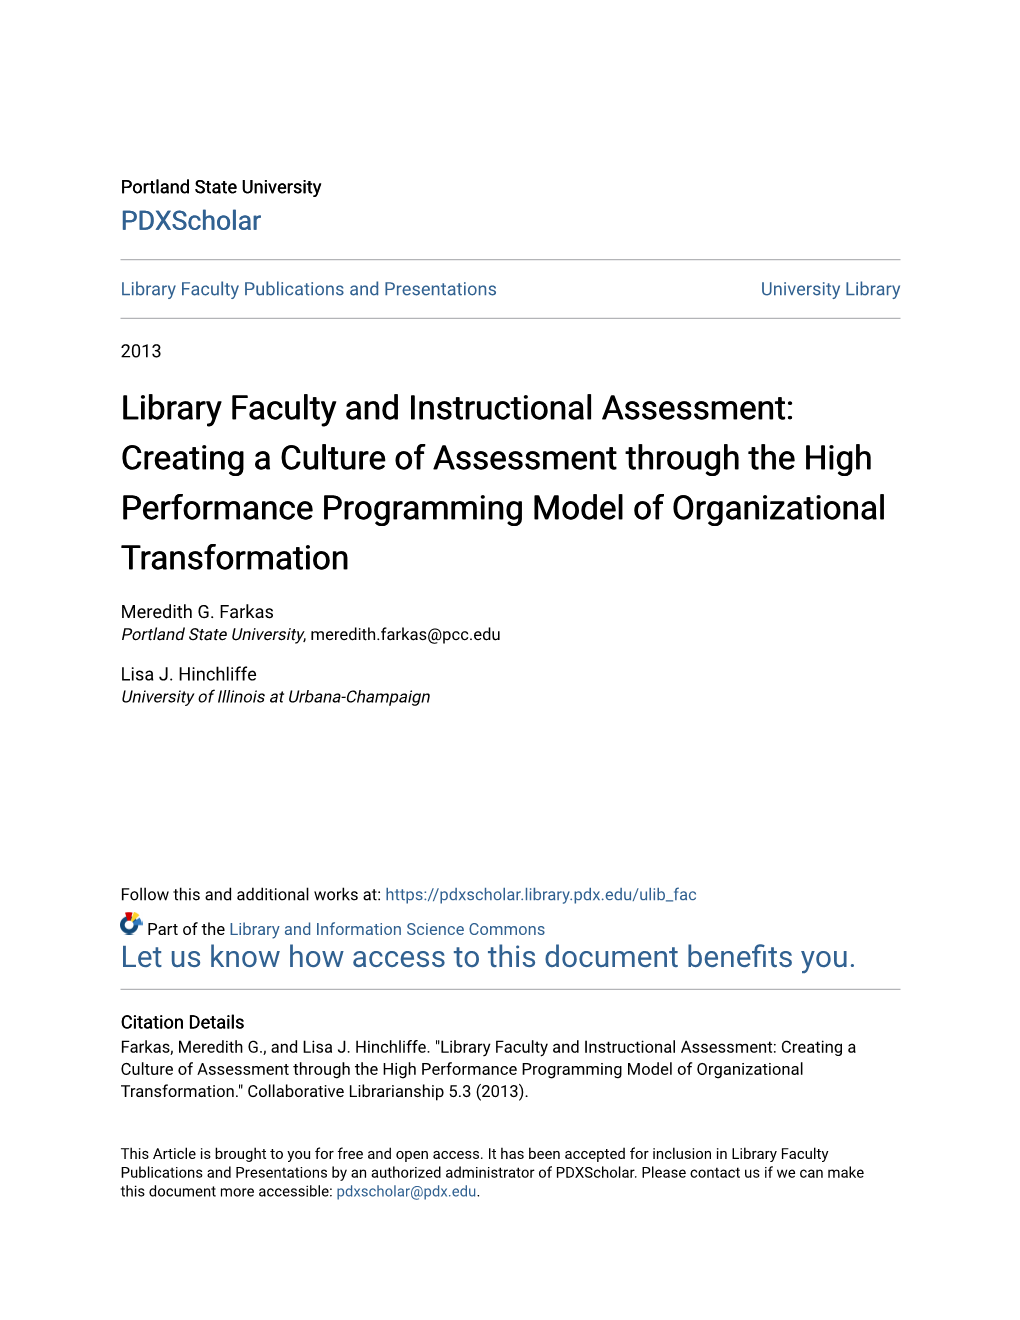 Library Faculty and Instructional Assessment: Creating a Culture of Assessment Through the High Performance Programming Model of Organizational Transformation